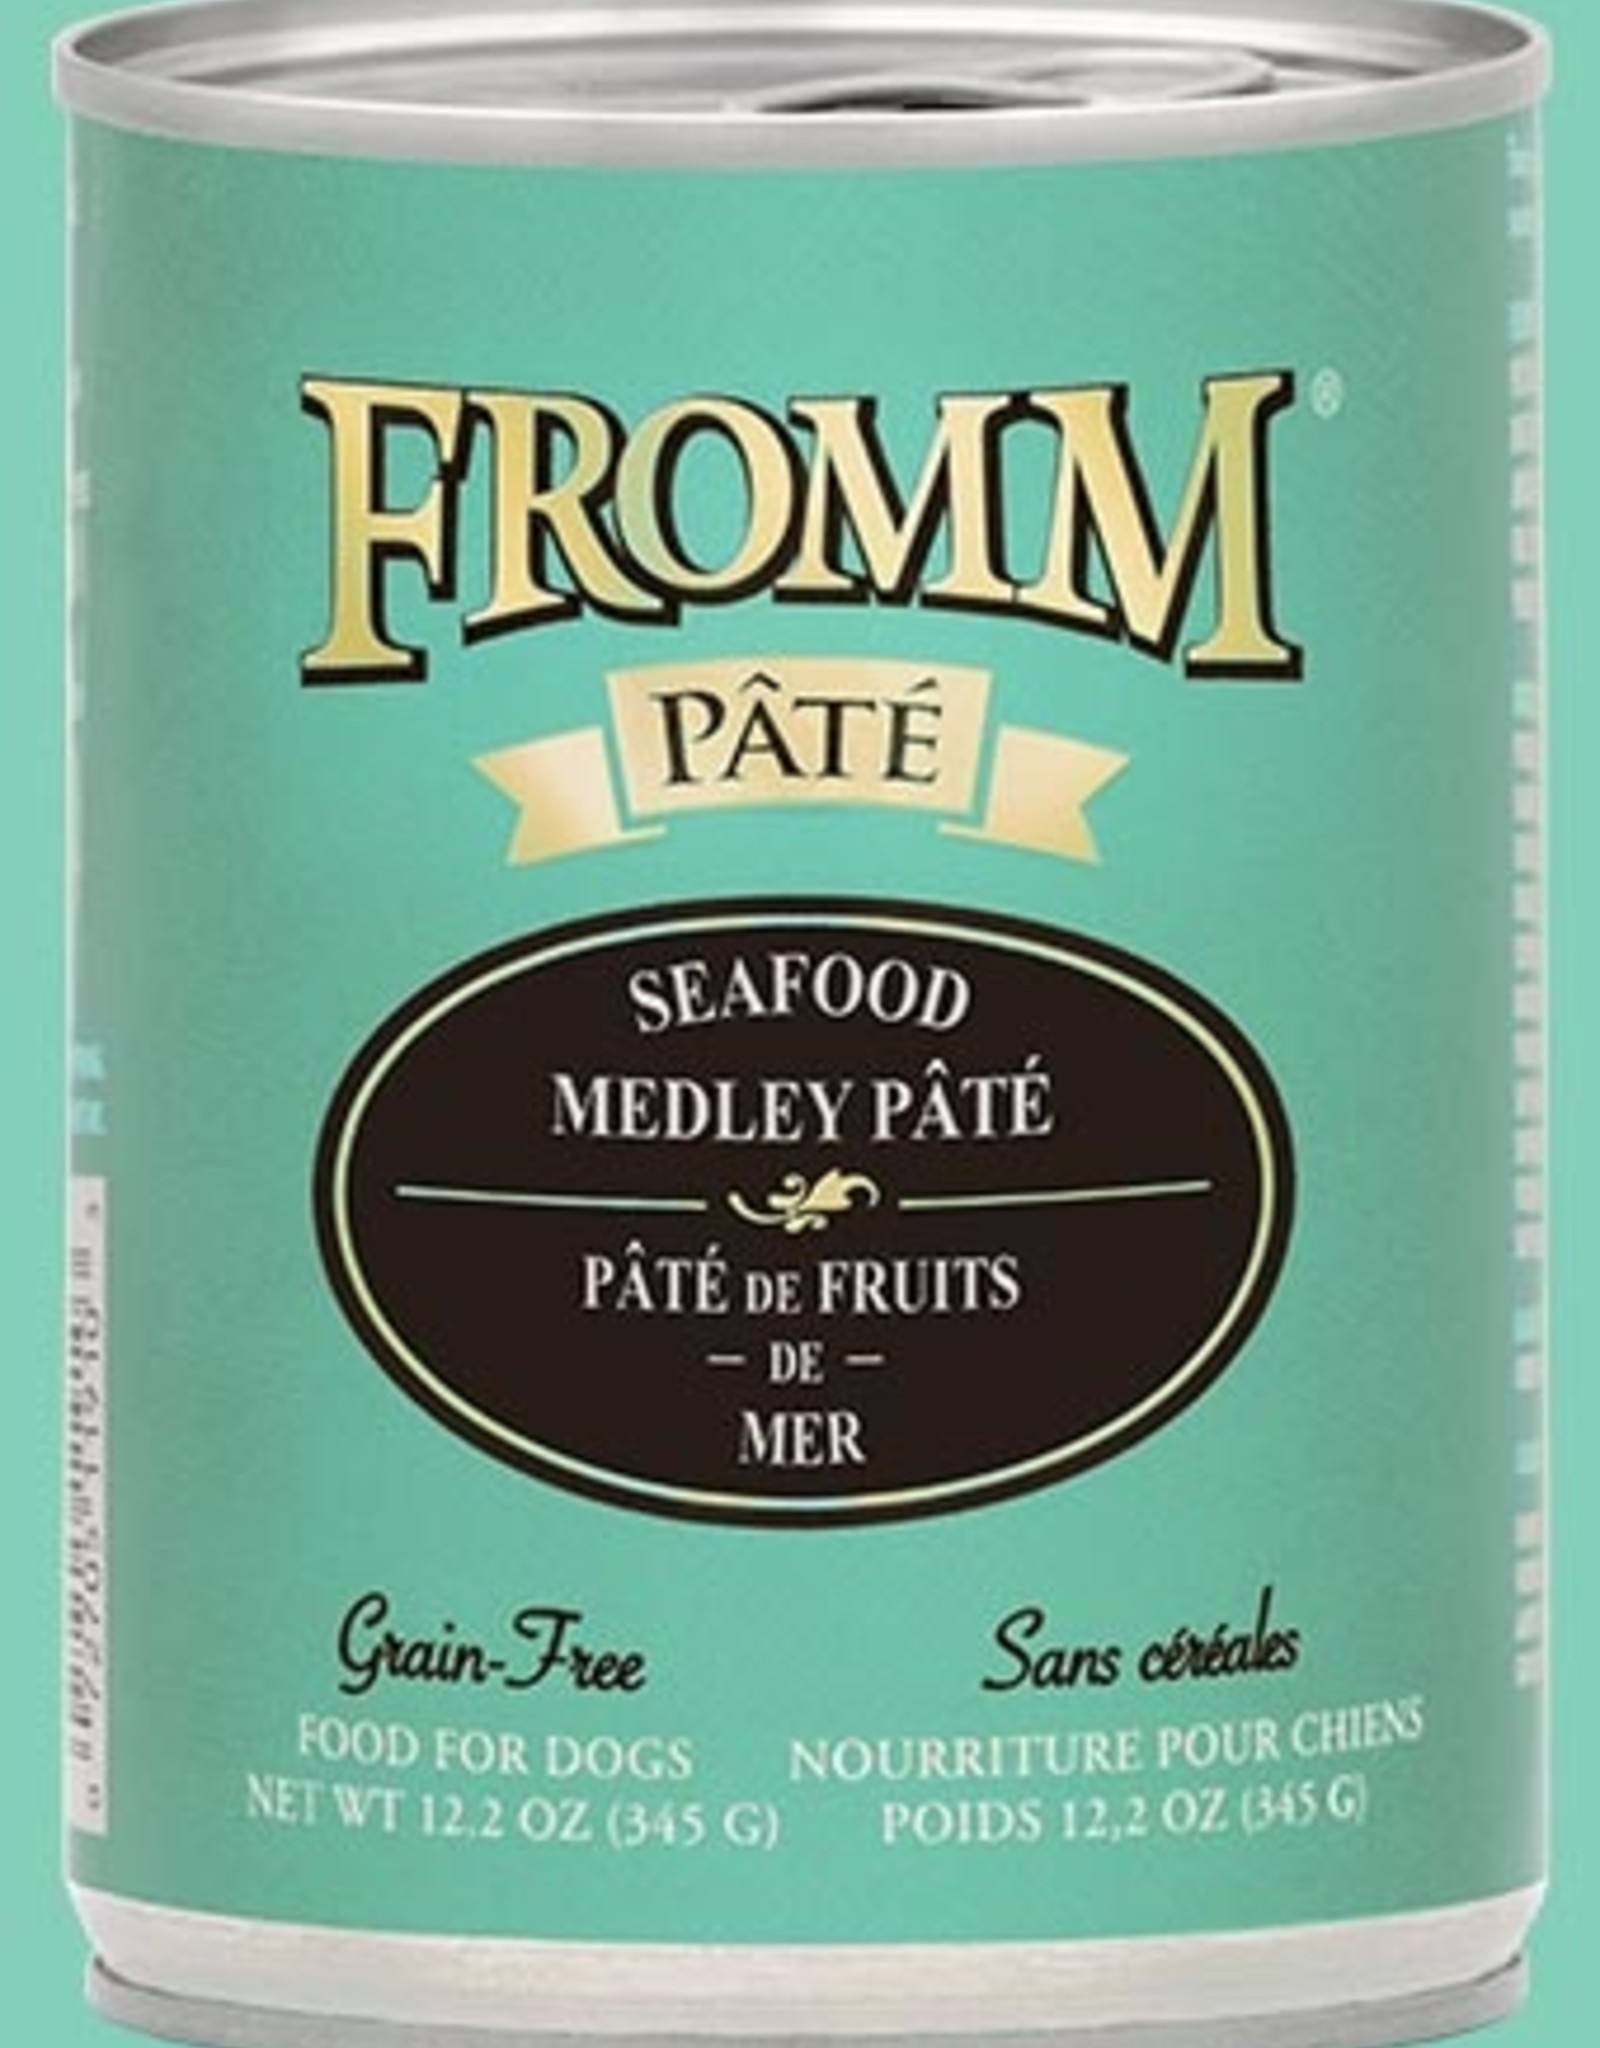 Fromm Seafood Medley Pate12oz